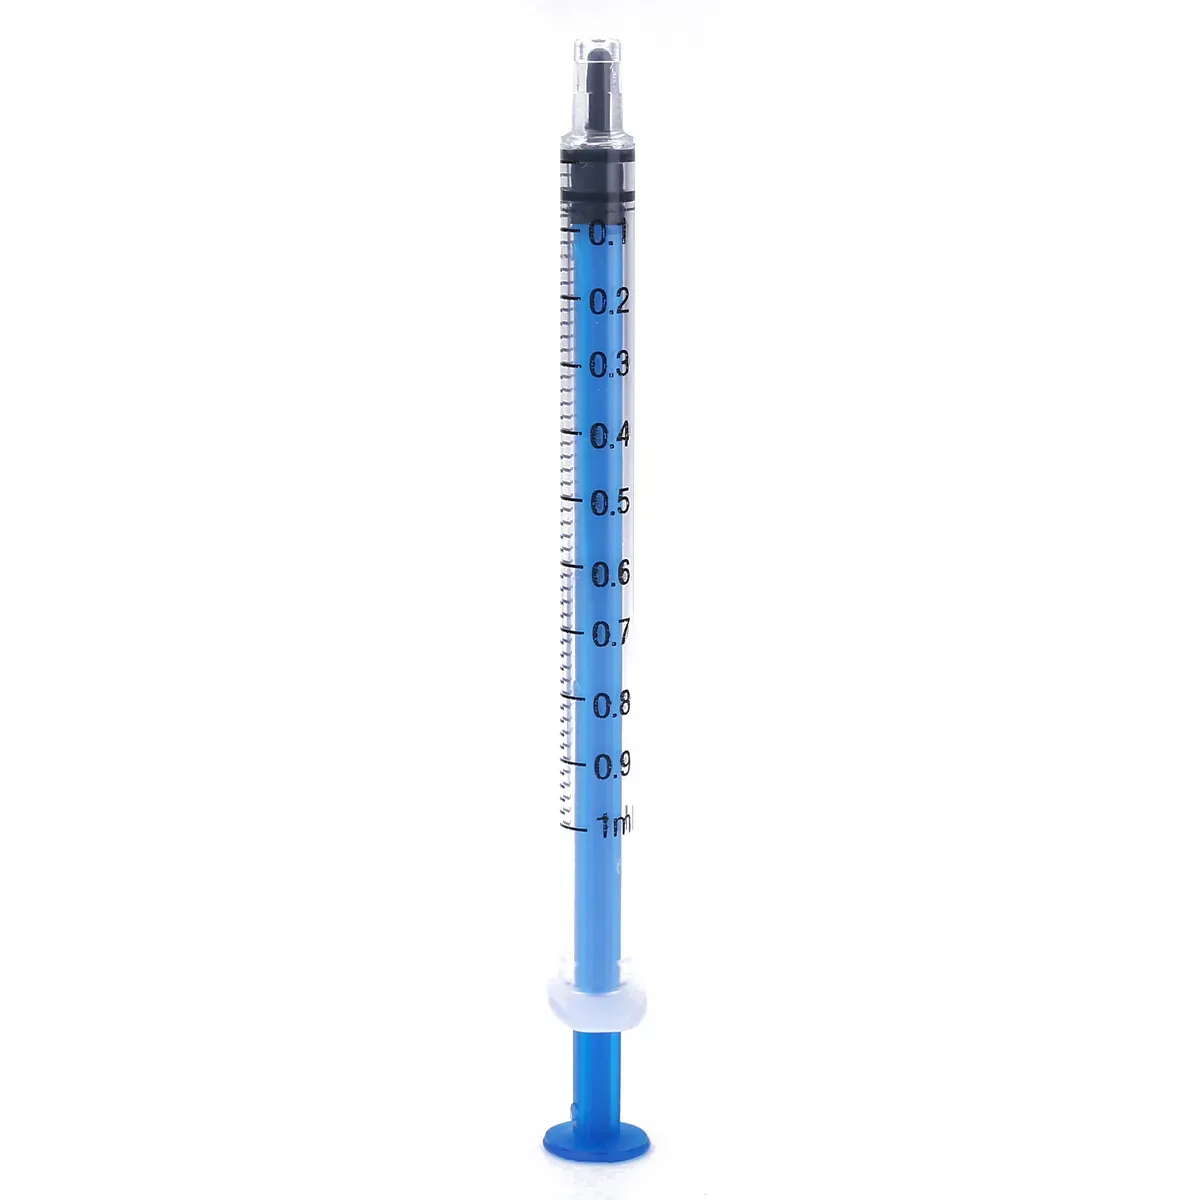 / Lab Supplies 1ml Plastic Disposable Injector Syringe For Refilling Measuring Nutrient Tools Feeding , Mixing Liquids No Needles